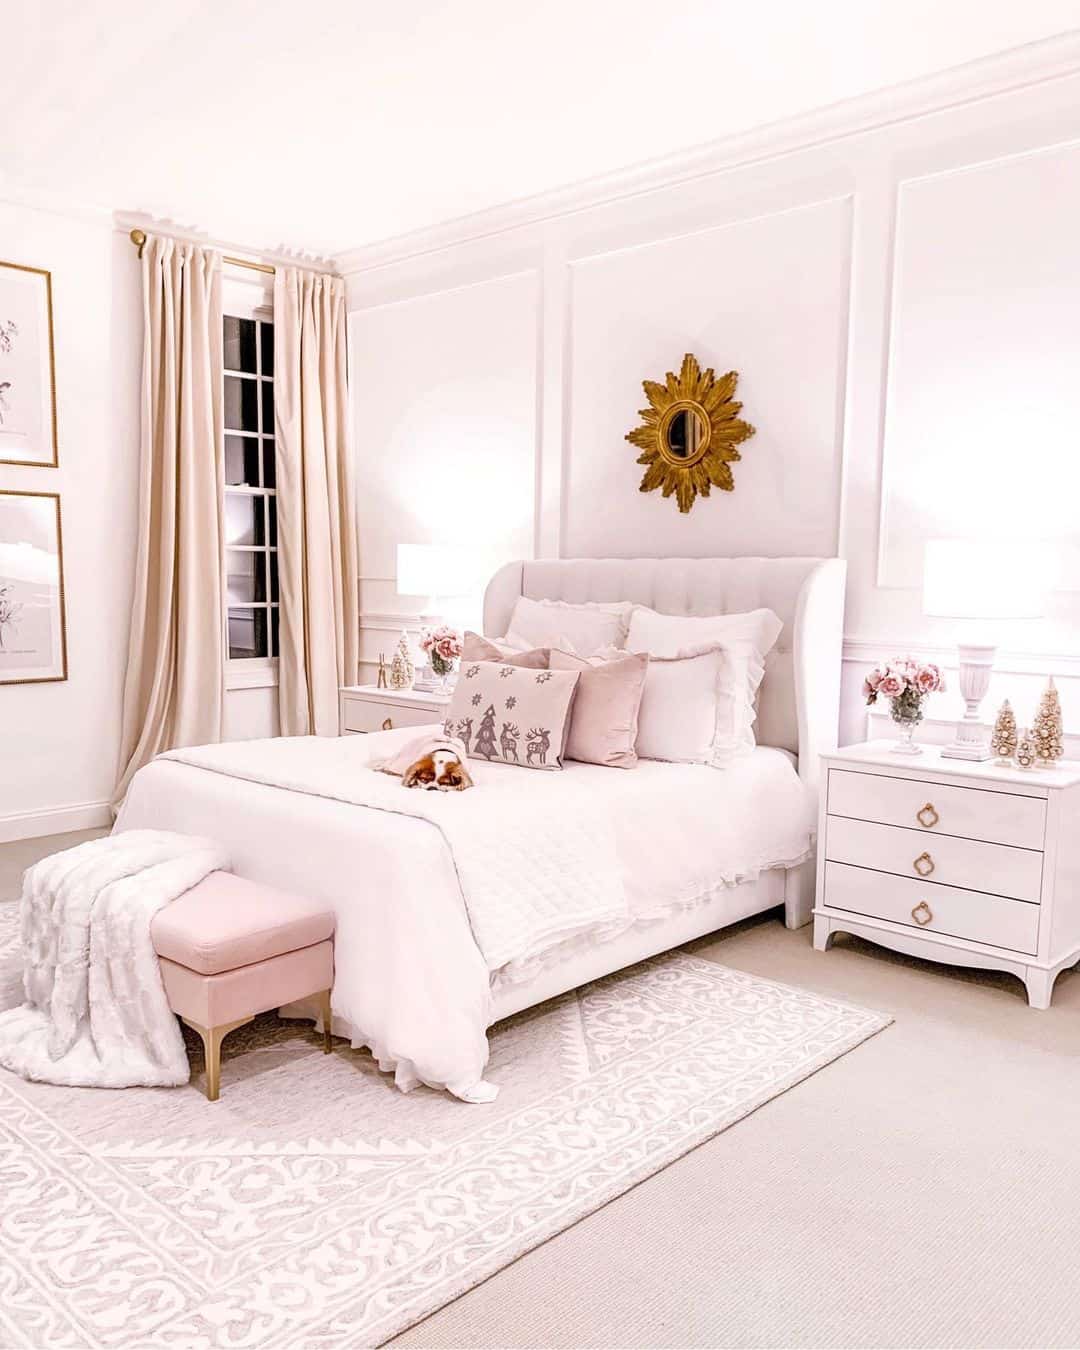 35 Wide Nightstands for an Unforgettable Farmhouse Bedroom